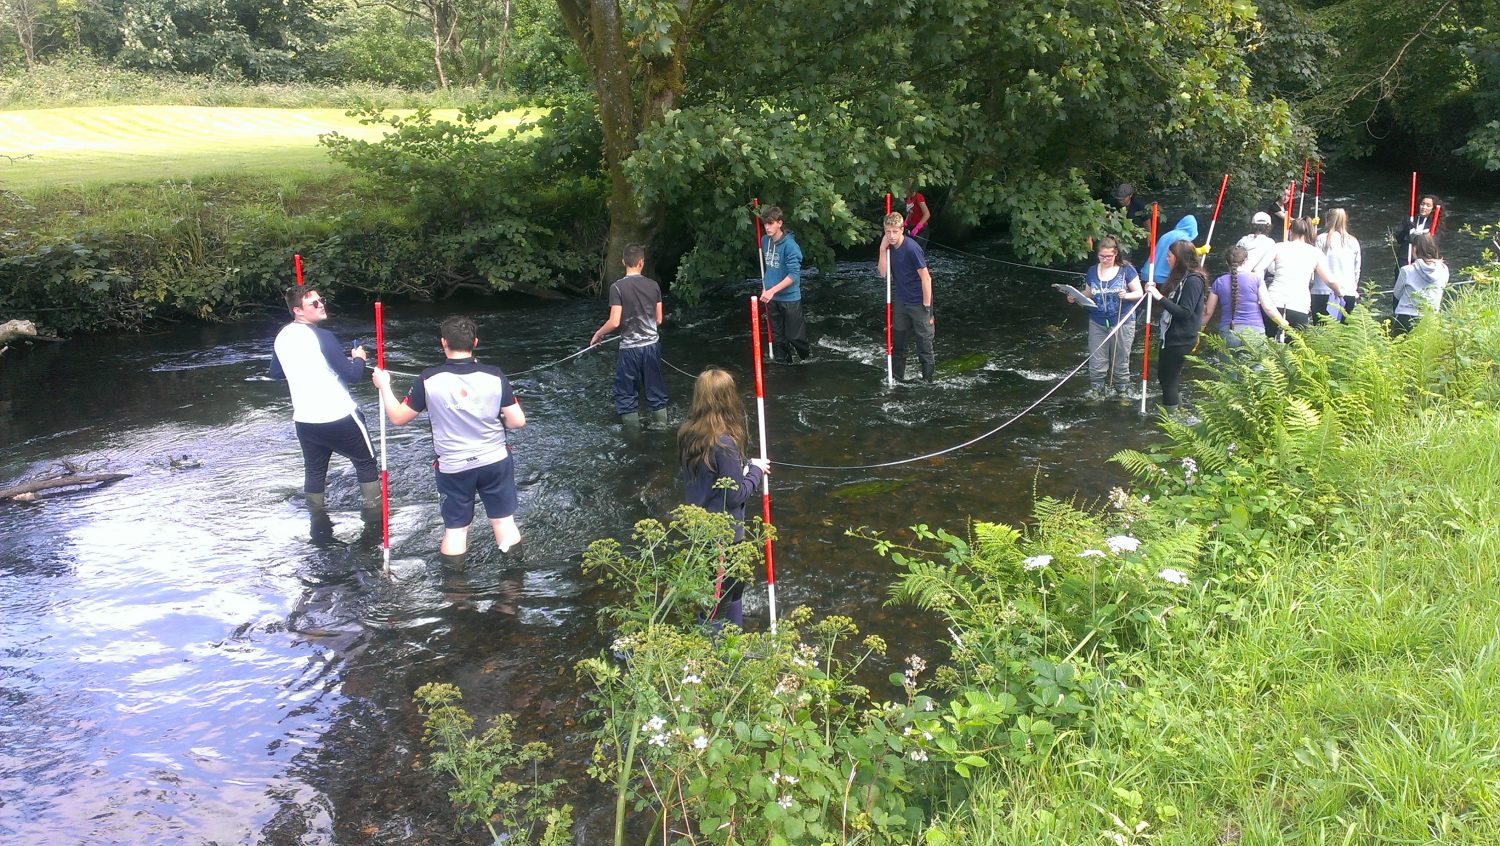 GCSE pupils measuring river channel and water flow in the Syfynwy River, Pembrokeshire Coast National Park, Wales, UK